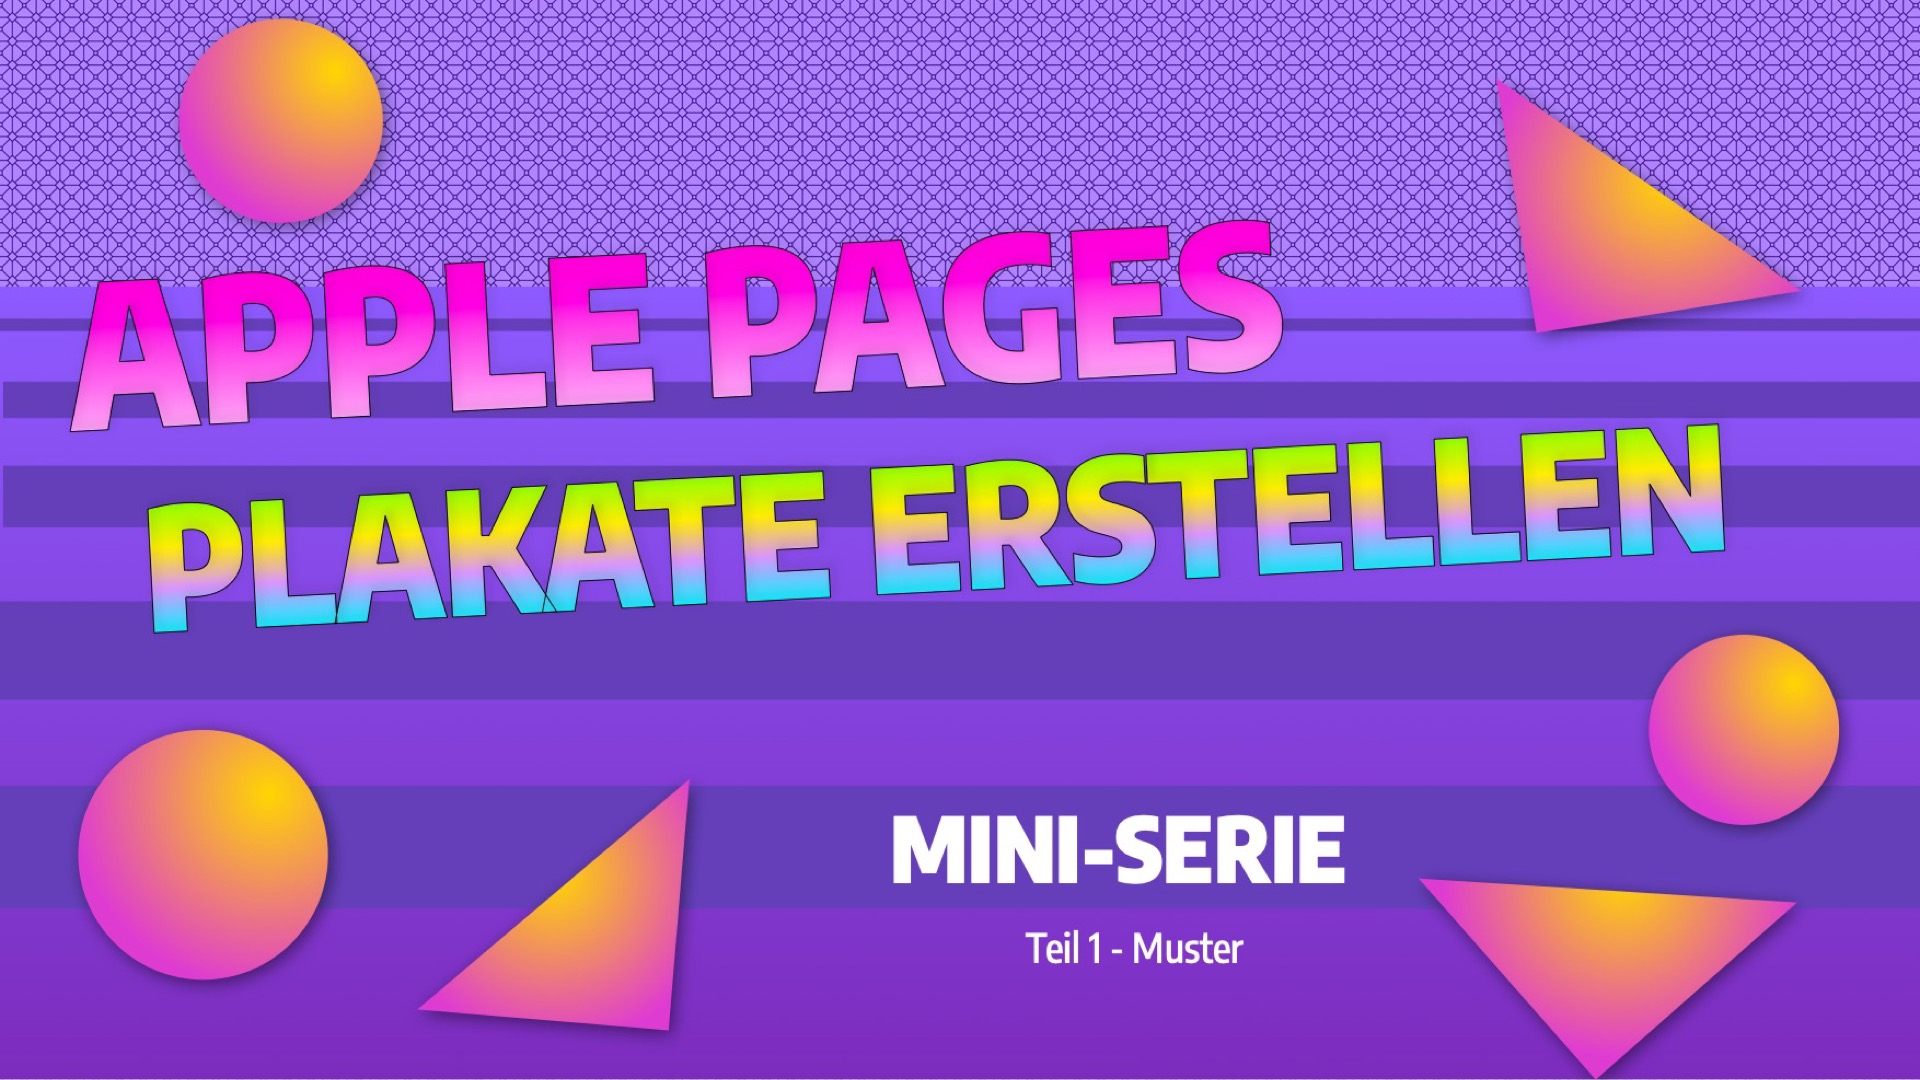 Image for APPLE PAGES - PLAKATE ERSTELLEN - Teil 1: Muster